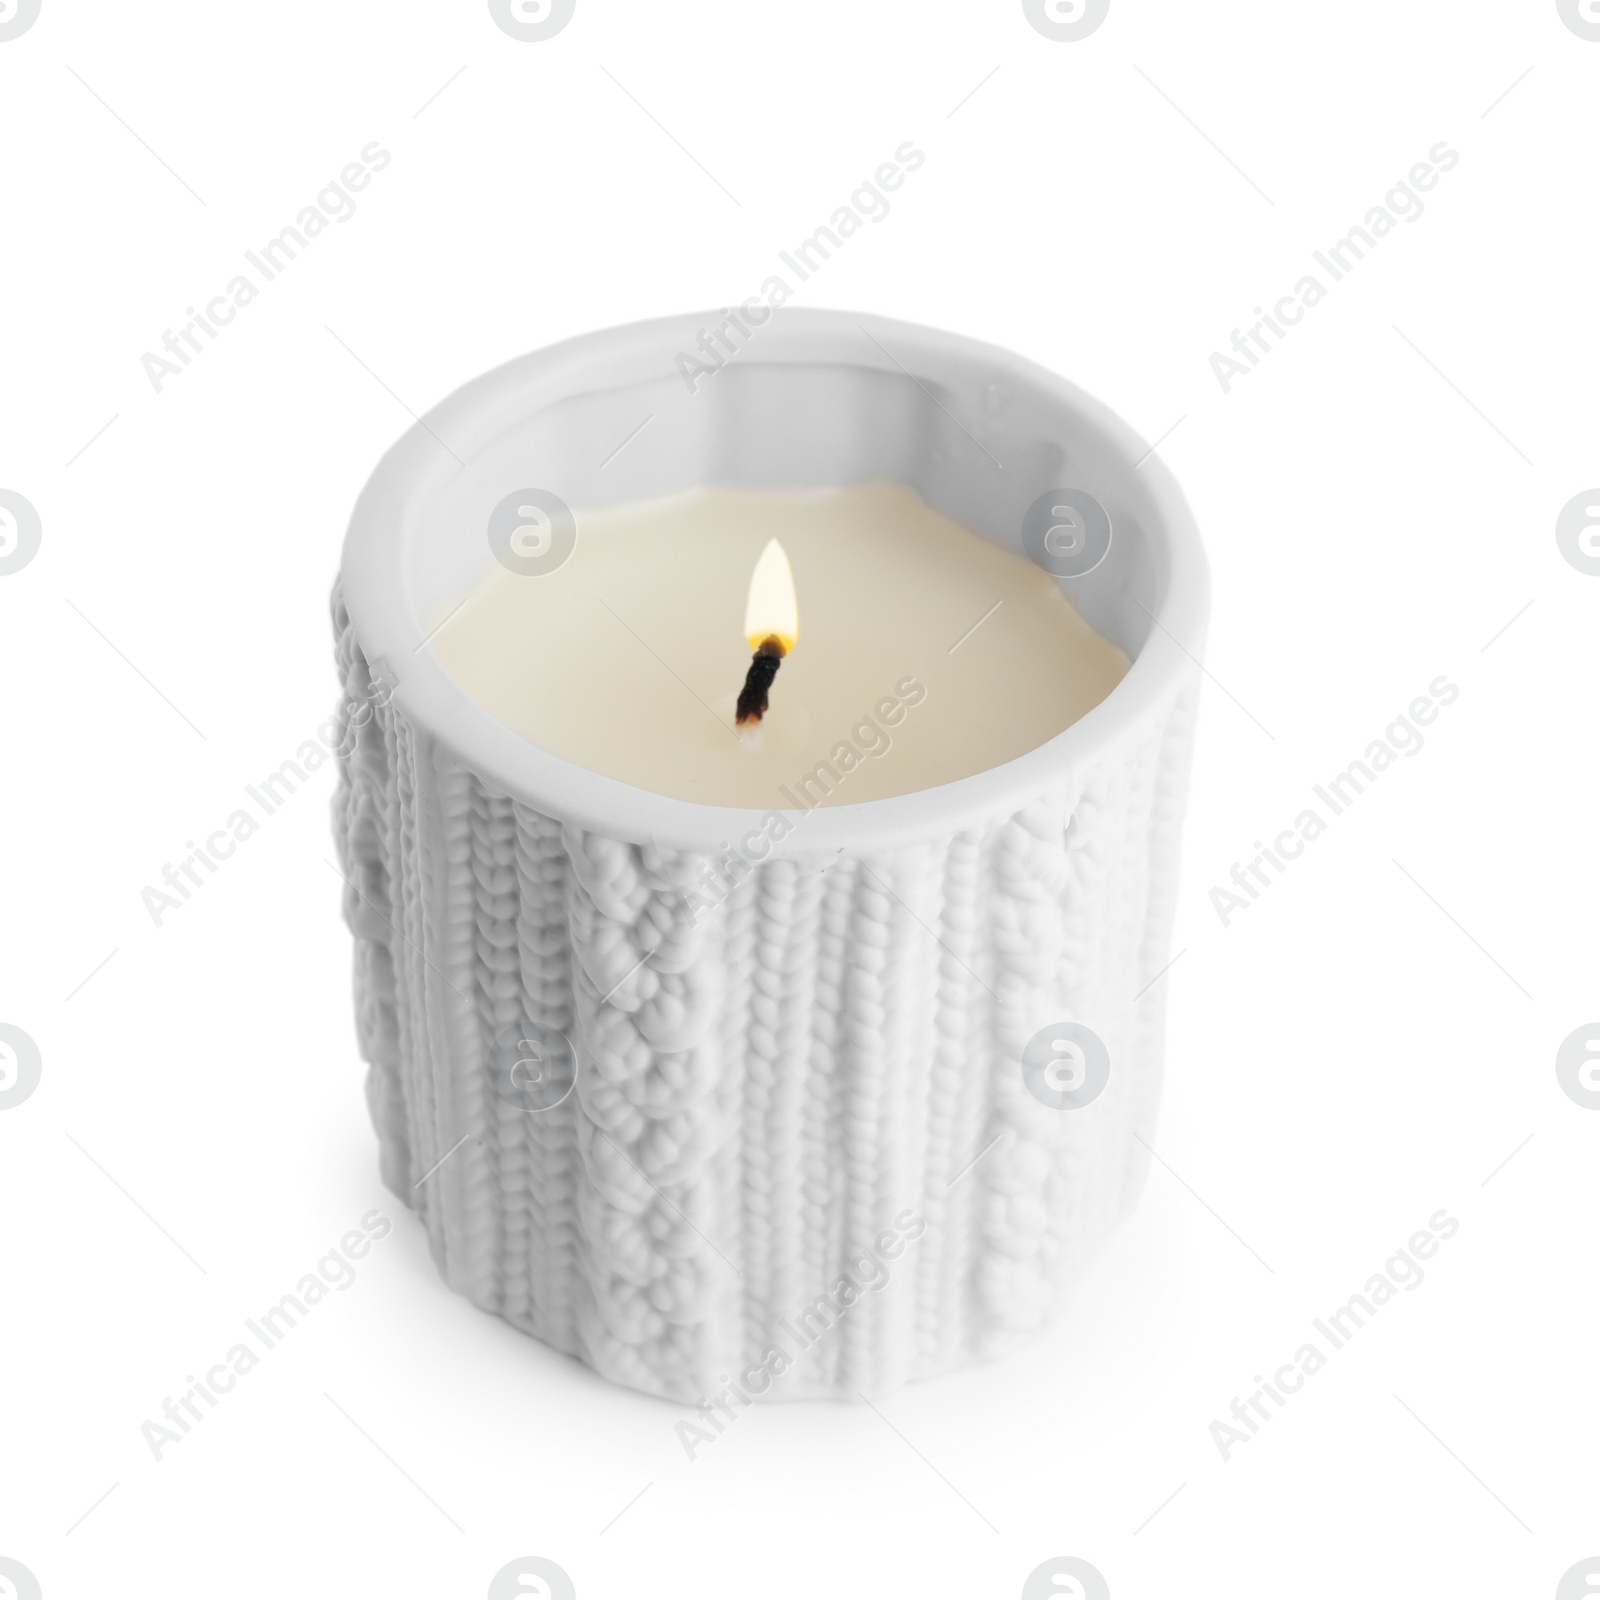 Photo of Candle in ornate holder on white background. Christmas decoration